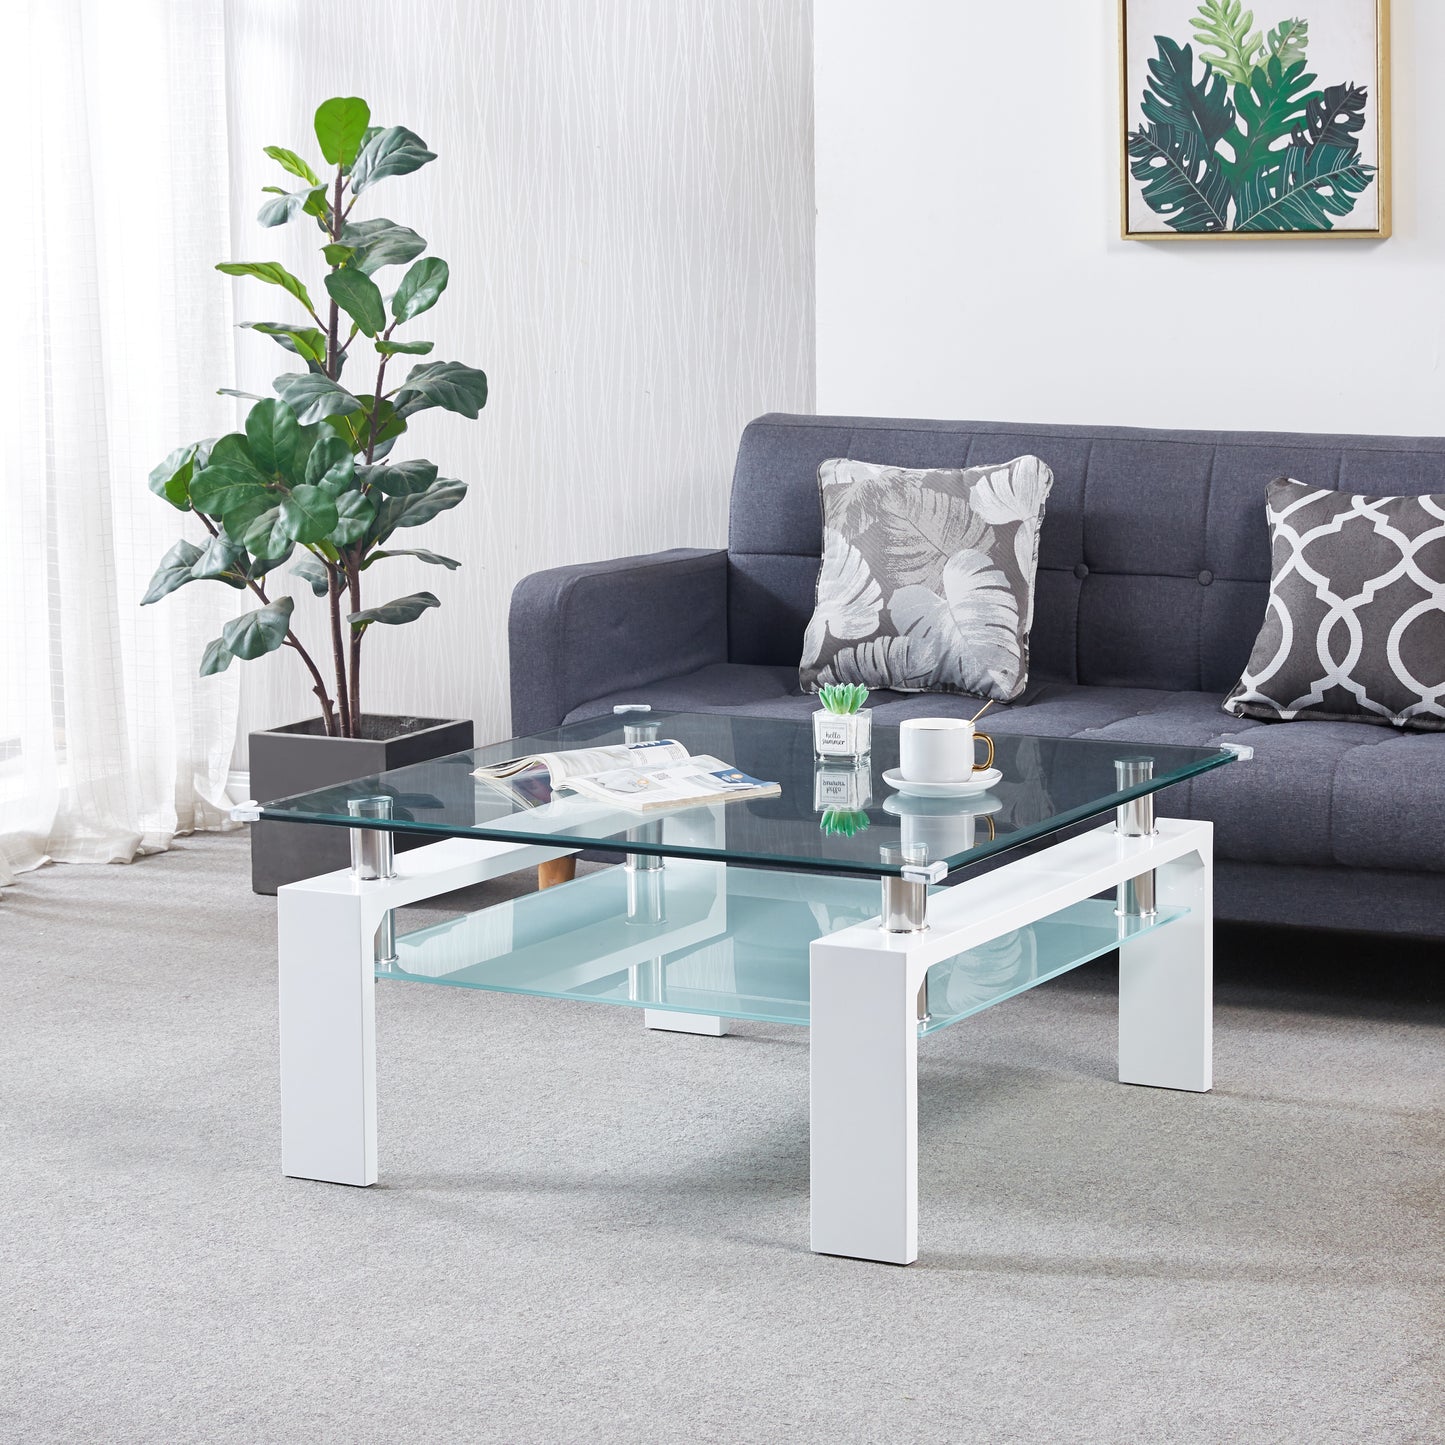 Contemporary Two-Tiered Glass Coffee Table with Sleek Legs